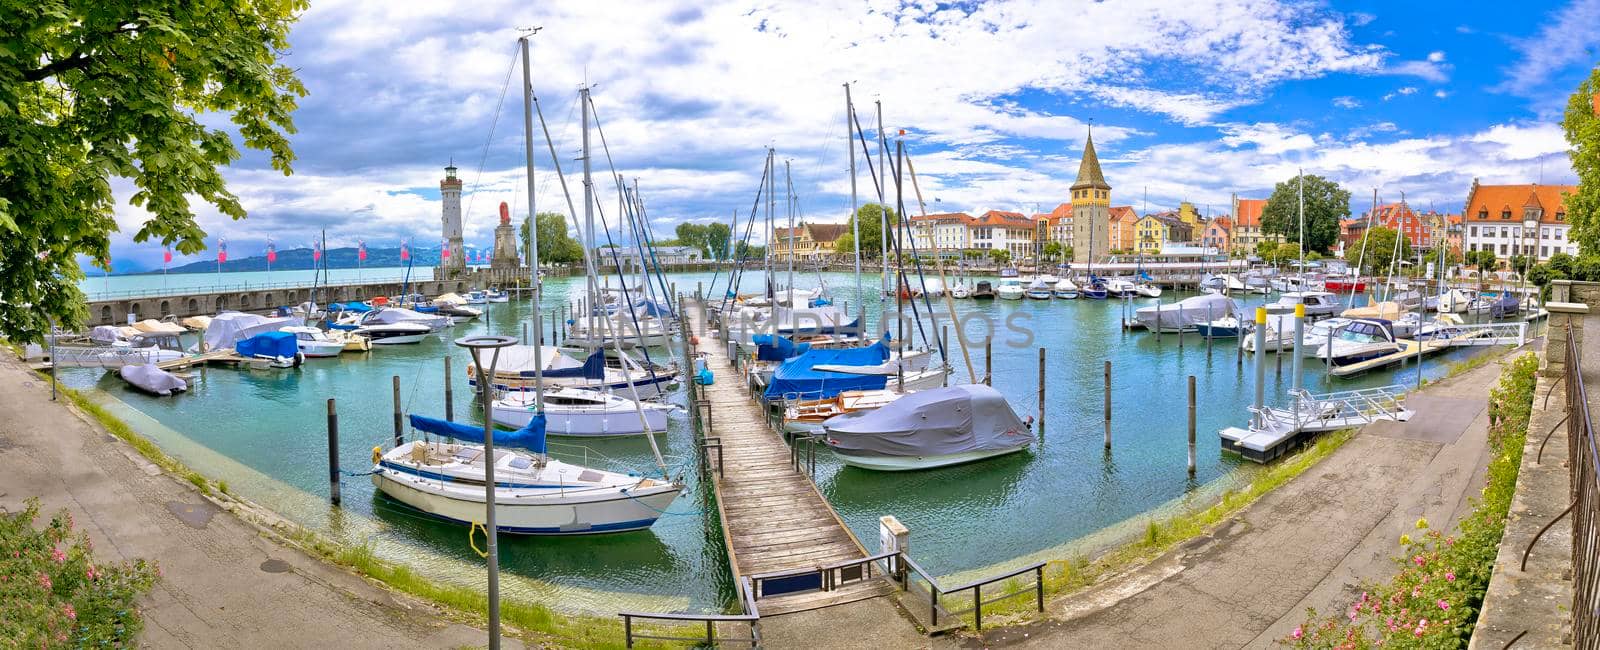 Town of Lindau on Bodensee lake panoramic view by xbrchx